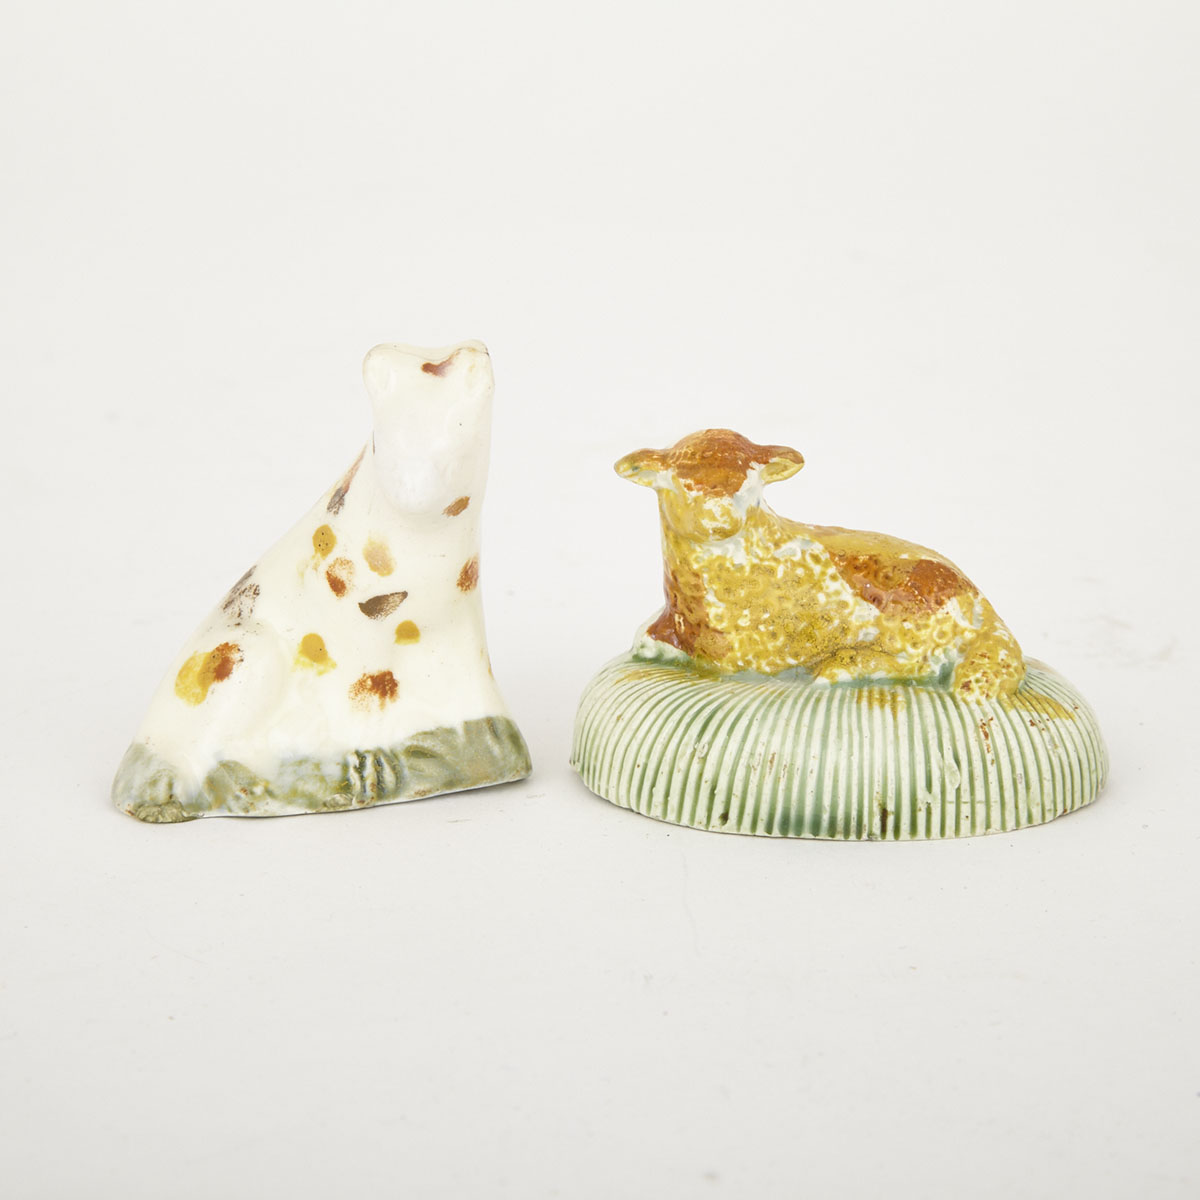 English Pearlware Small Dog and a Sheep, 18th/19th century